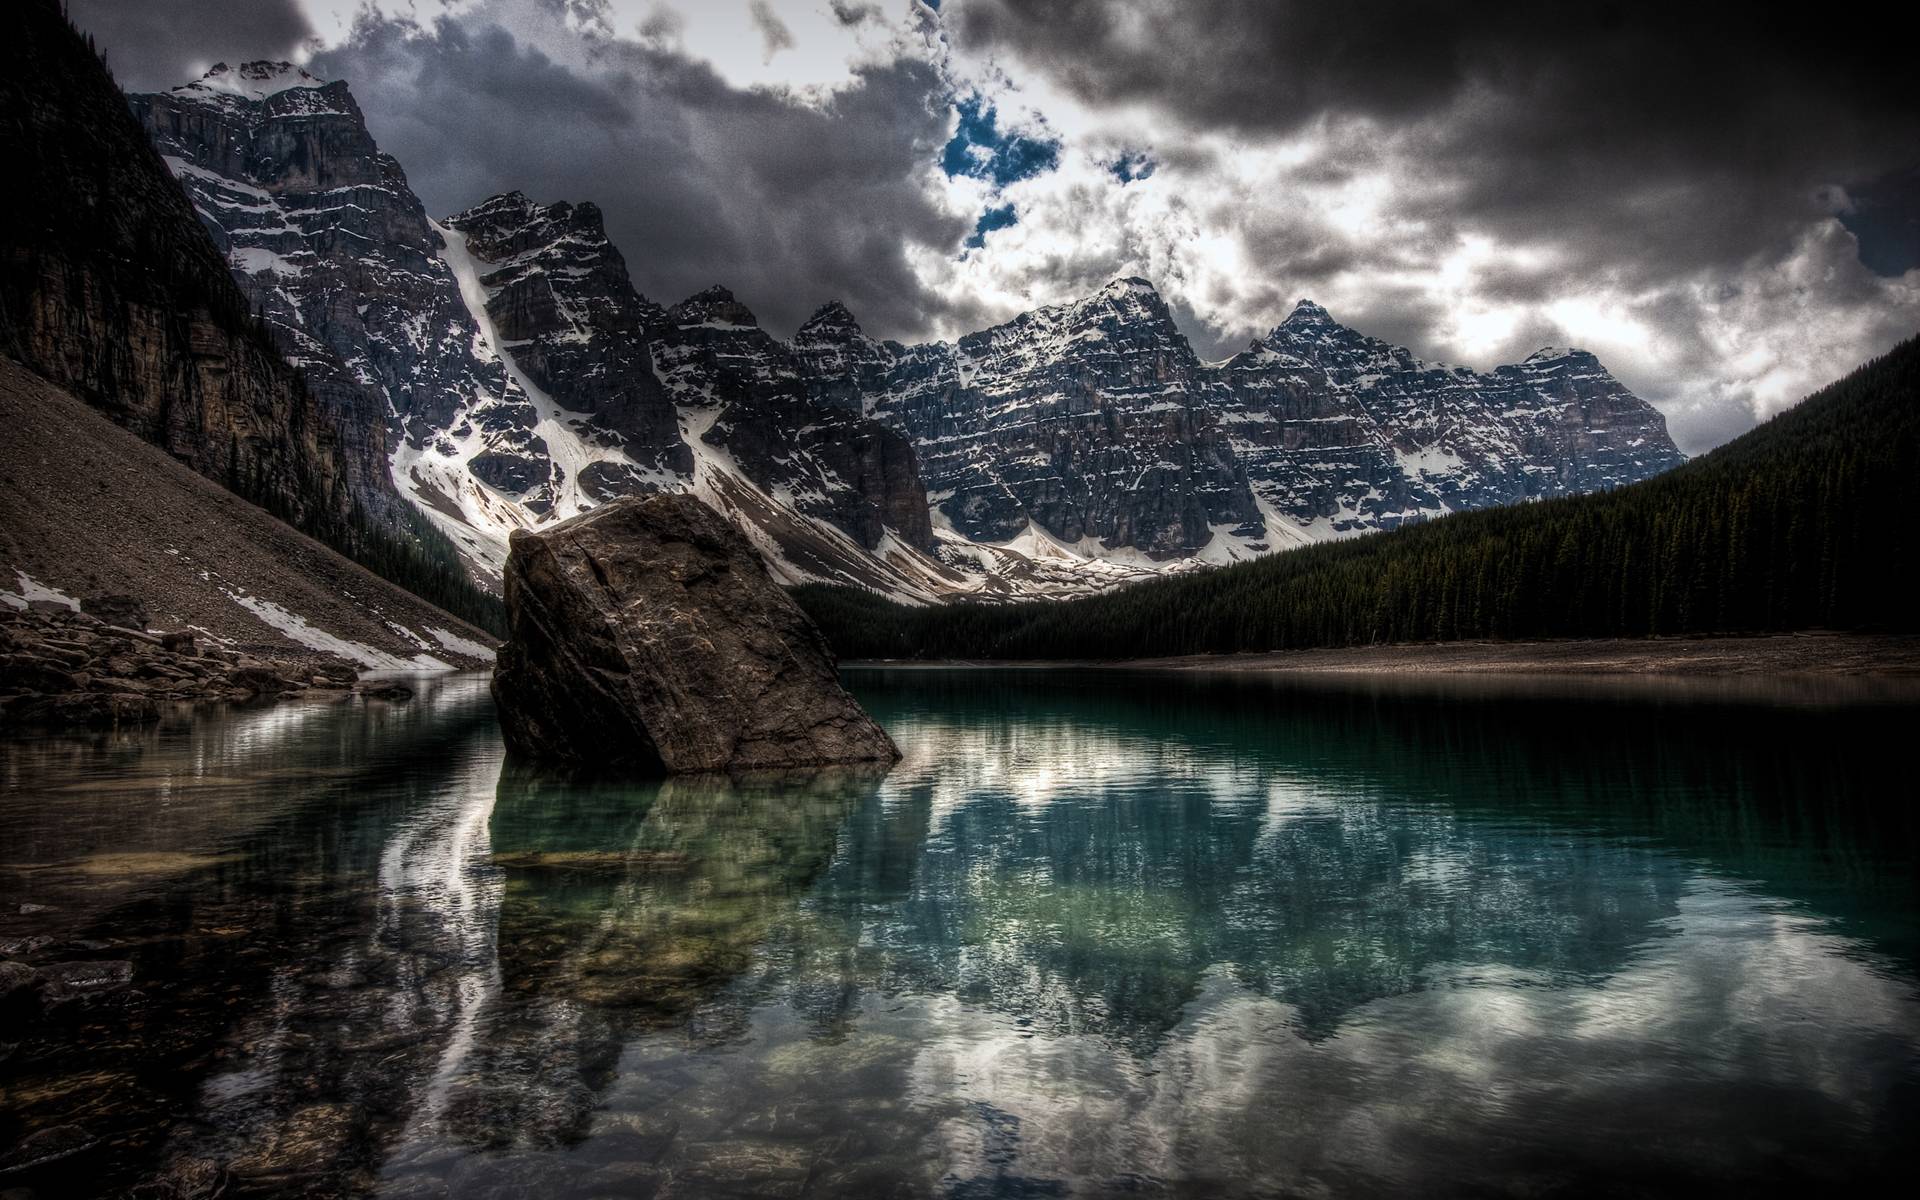 General 1920x1200 landscape mountains clouds water rocks Moraine Lake Banff National Park Canada HDR nature low light